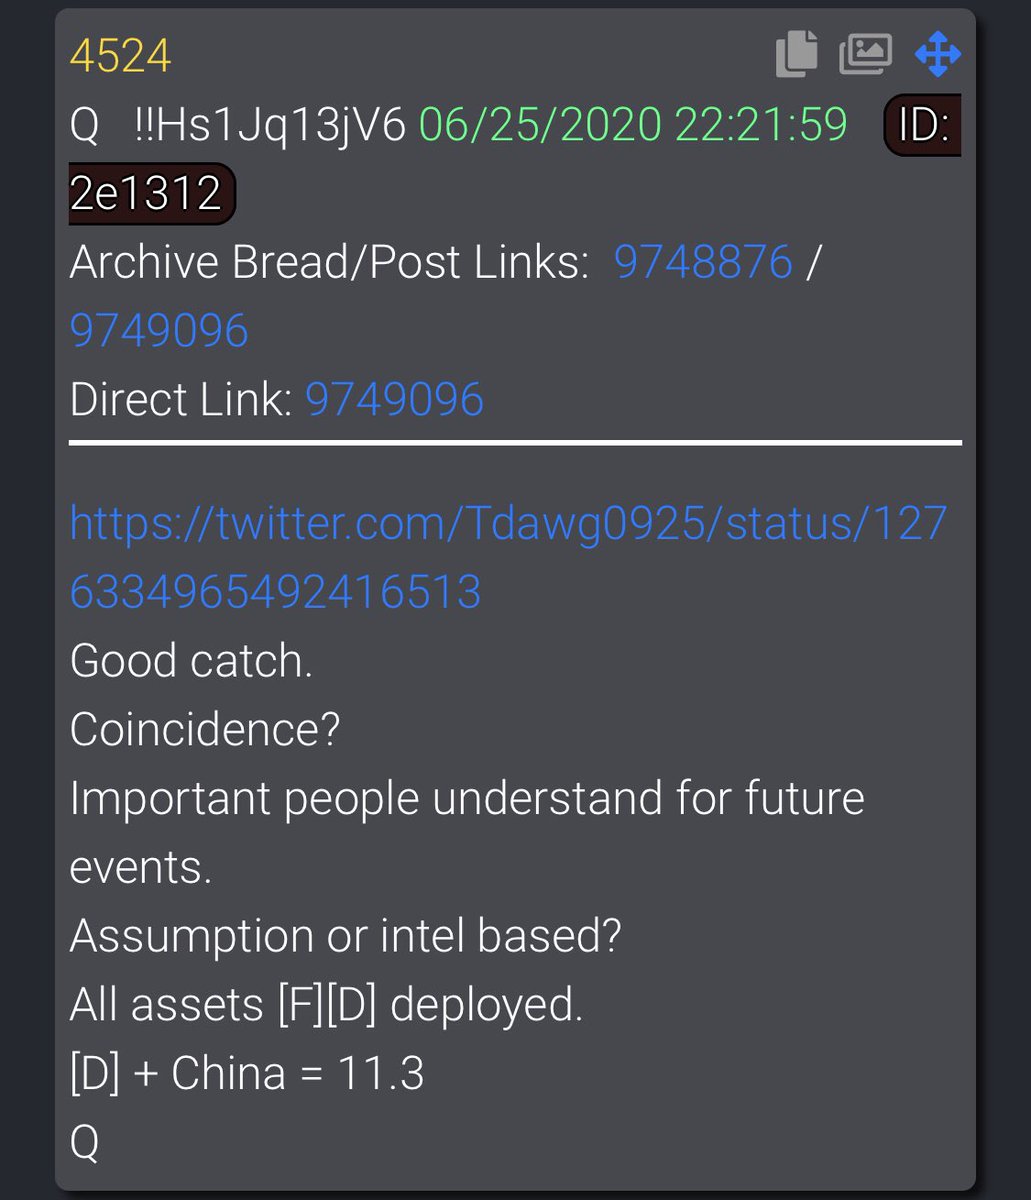 4524   https://twitter.com/Tdawg0925/status/1276334965492416513Good catch.Coincidence? Important people understand for future events.Assumption or intel based?All assets [F][D] deployed.[D] + China = 11.3Q